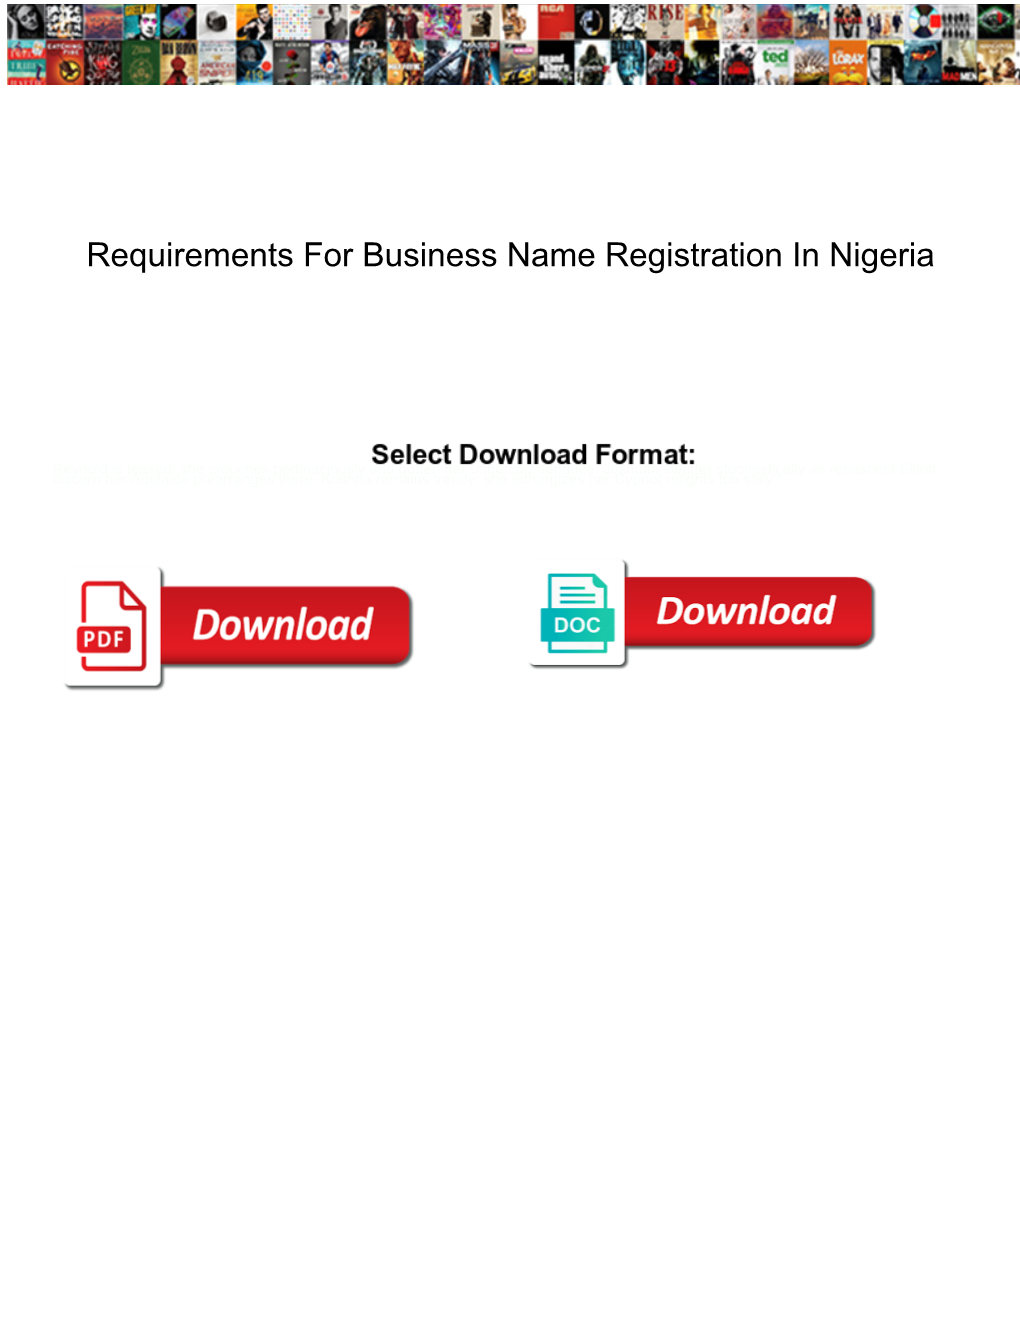 Requirements for Business Name Registration in Nigeria